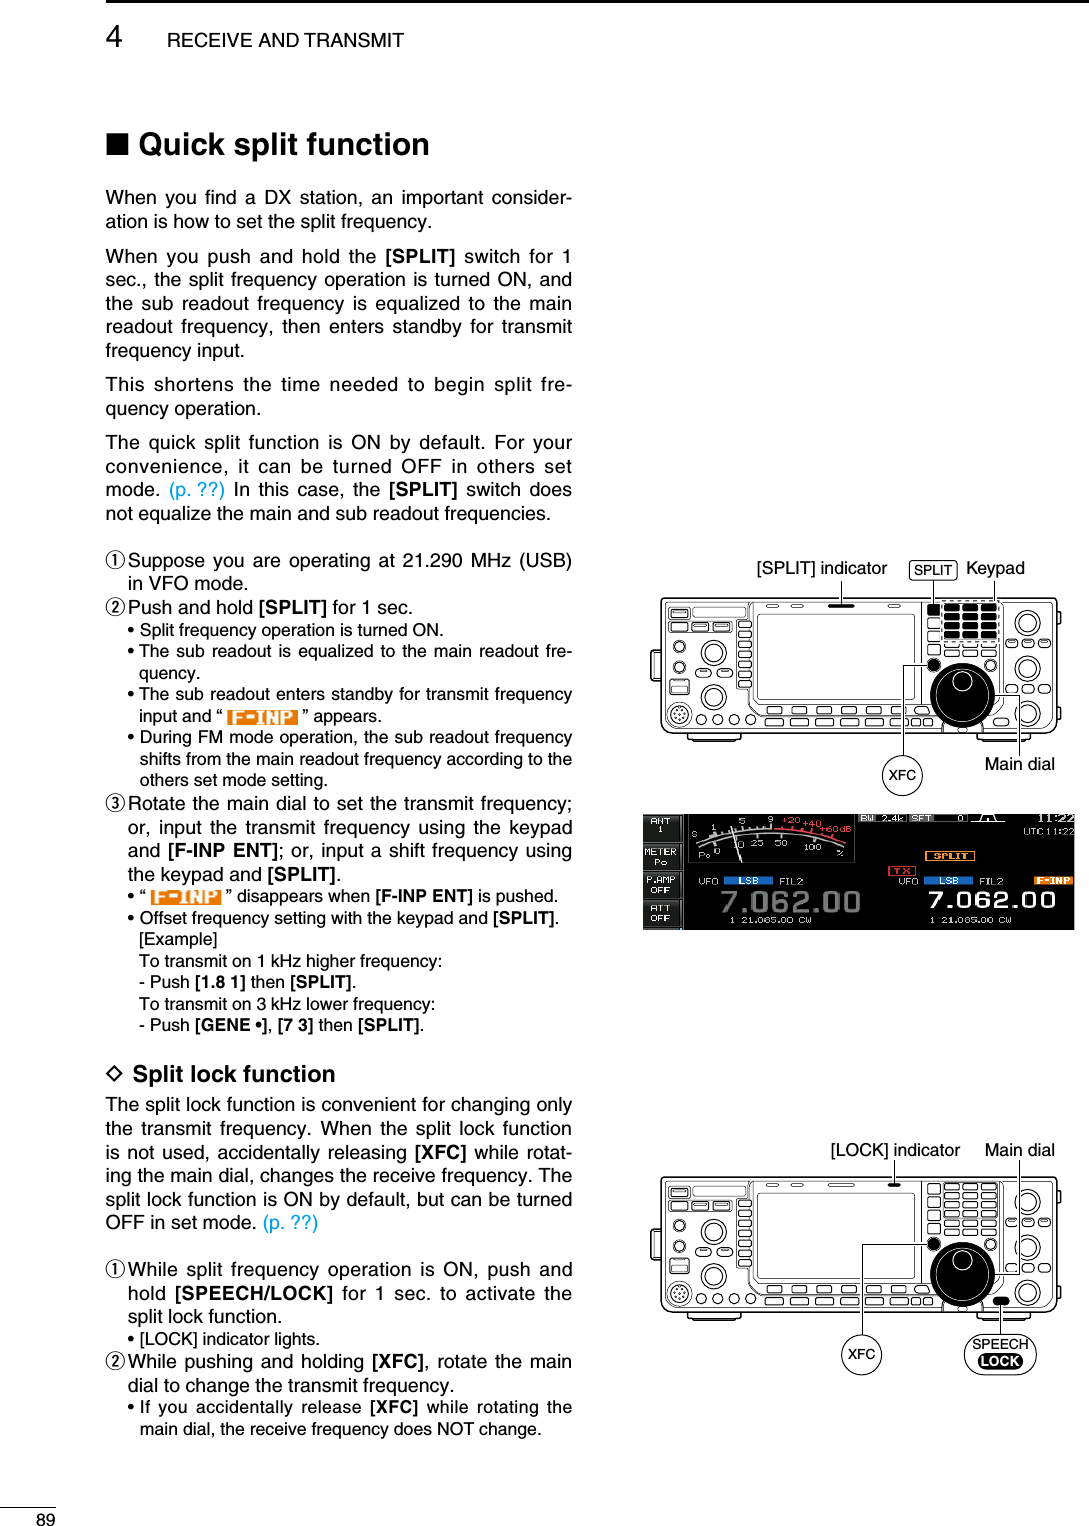 N Quick split functionWhen you find a DX station, an important consider-ation is how to set the split frequency.When you push and hold the [SPLIT] switch for 1 sec., the split frequency operation is turned ON, and the sub readout frequency is equalized to the main readout frequency, then enters standby for transmit frequency input.This shortens the time needed to begin split fre-quency operation.The quick split function is ON by default. For your convenience, it can be turned OFF in others set mode.  (p. ??) In this case, the [SPLIT] switch does not equalize the main and sub readout frequencies.q  Suppose you are operating at 21.290 MHz (USB) in VFO mode. w Push and hold [SPLIT] for 1 sec.  • Split frequency operation is turned ON. •  The sub readout is equalized to the main readout fre-quency. •  The sub readout enters standby for transmit frequency input and “   ” appears. •  During FM mode operation, the sub readout frequency shifts from the main readout frequency according to the  others set mode setting.e  Rotate the main dial to set the transmit frequency; or, input the transmit frequency using the keypad and [F-INP ENT]; or, input a shift frequency using the keypad and [SPLIT]. •  “   ” disappears when [F-INP ENT] is pushed.  • Offset frequency setting with the keypad and [SPLIT].  [Example]    To transmit on 1 kHz higher frequency:  - Push [1.8 1] then [SPLIT].    To transmit on 3 kHz lower frequency:  - Push [GENE •], [7 3] then [SPLIT].D Split lock functionThe split lock function is convenient for changing only the transmit frequency. When the split lock function is not used, accidentally releasing [XFC] while rotat-ing the main dial, changes the receive frequency. The split lock function is ON by default, but can be turned OFF in set mode. (p. ??)q  While split frequency operation is ON, push and hold  [SPEECH/LOCK] for 1 sec. to activate the split lock function.  • [LOCK] indicator lights.w  While pushing and holding [XFC], rotate the main dial to change the transmit frequency. •  If you accidentally release [XFC] while rotating the main dial, the receive frequency does NOT change.Main dial[SPLIT] indicator KeypadXFCSPLITMain dial[LOCK] indicatorSPEECHLOCKXFC894RECEIVE AND TRANSMIT